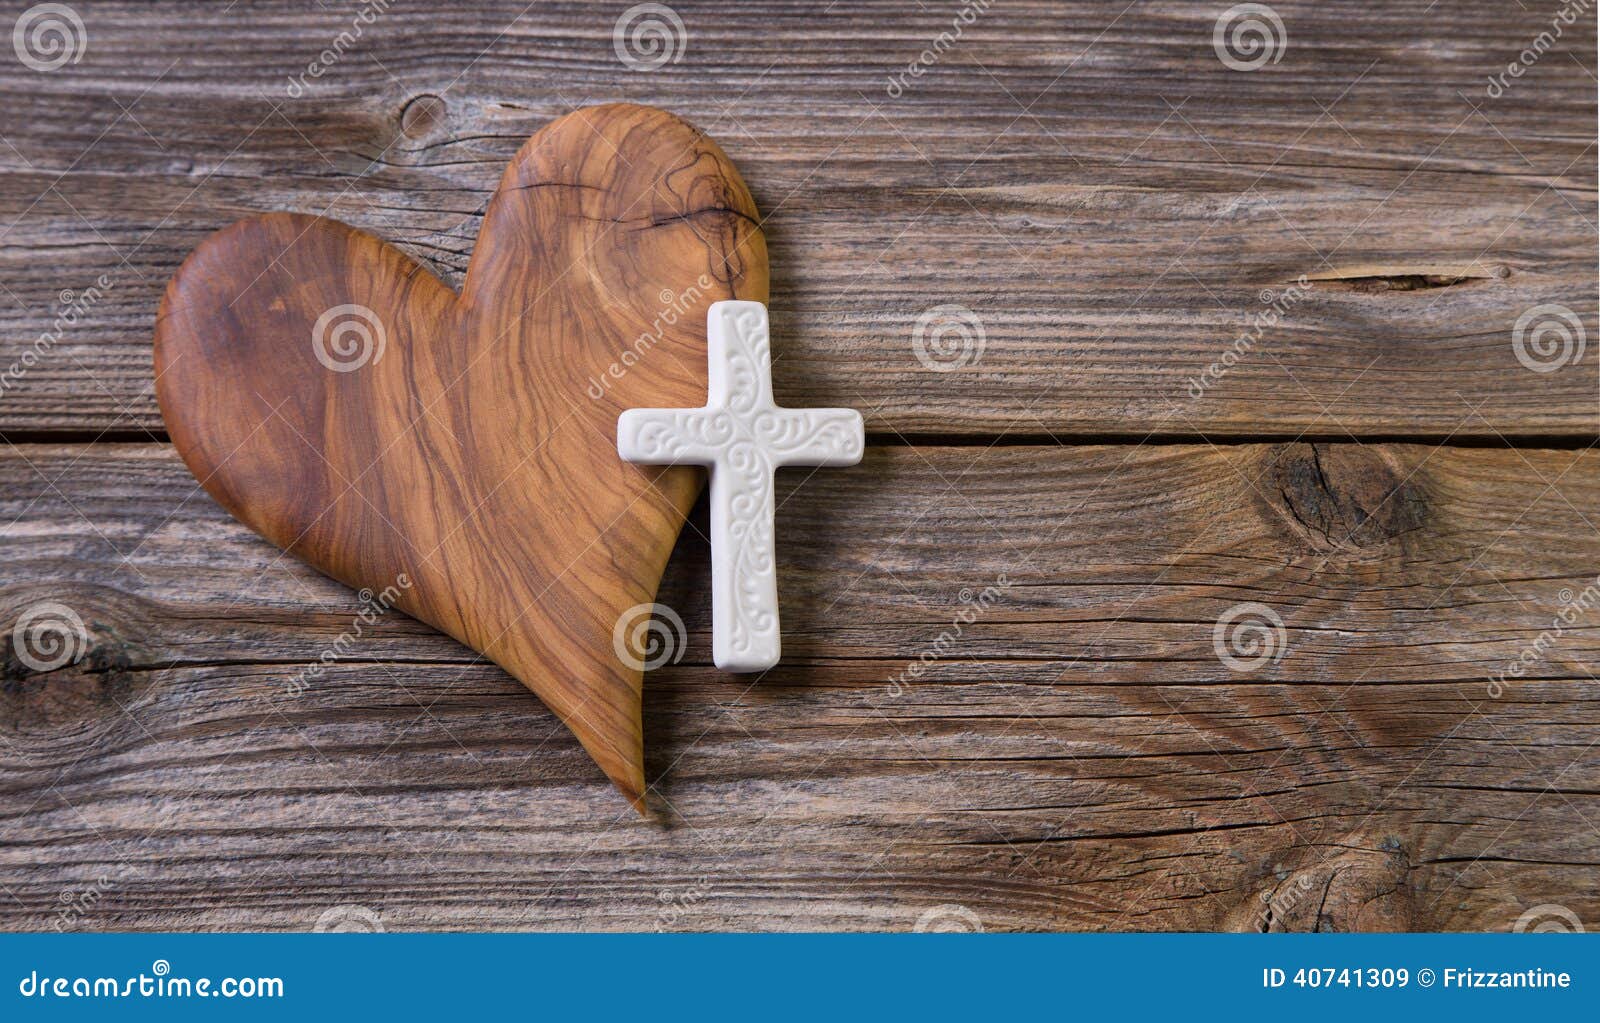 wooden background with olive heart and white cross for an obituary notice.